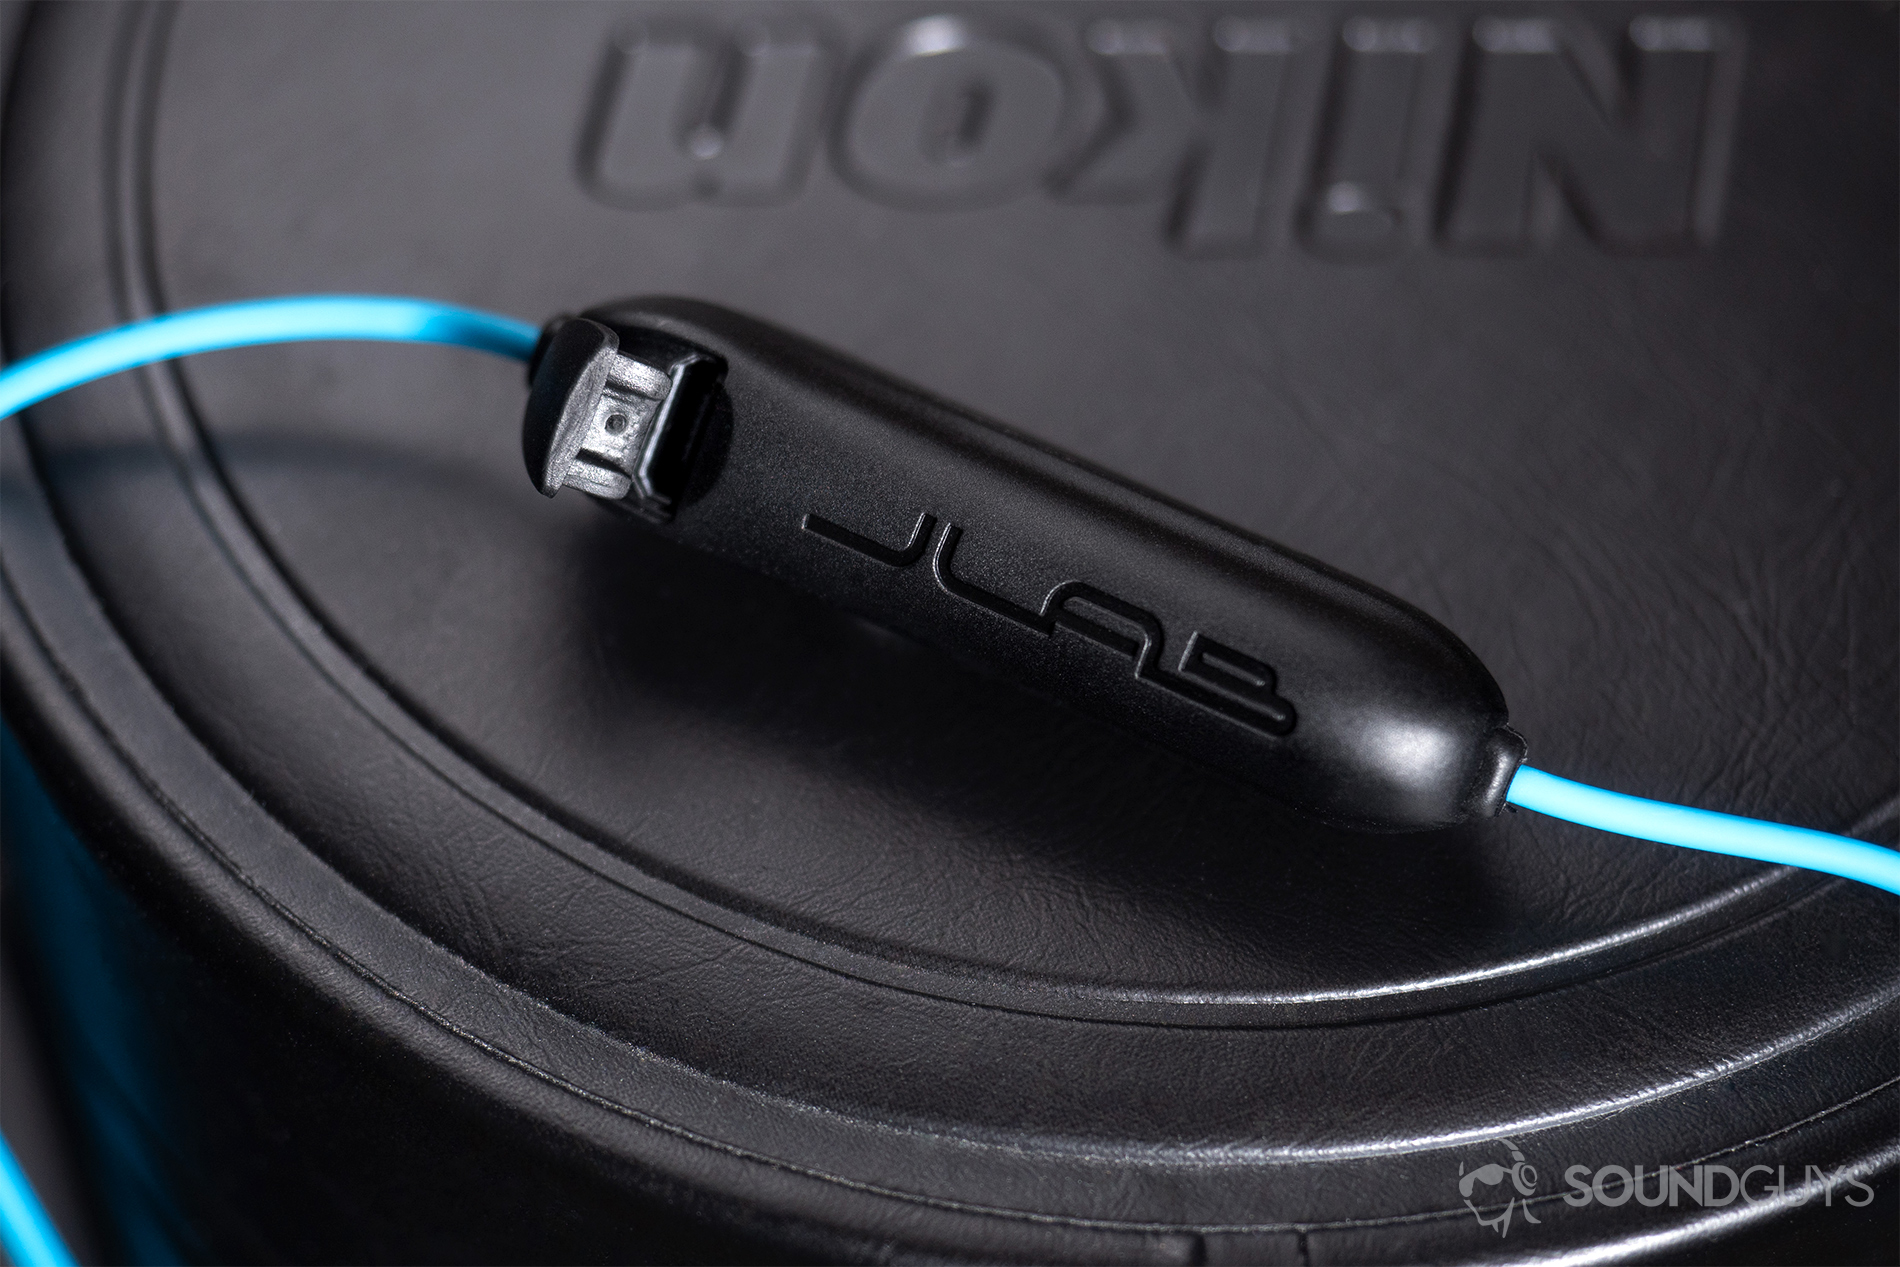 JLab Fit Sport Wireless: The micro-USB port on the back of the in-line mic and remote.